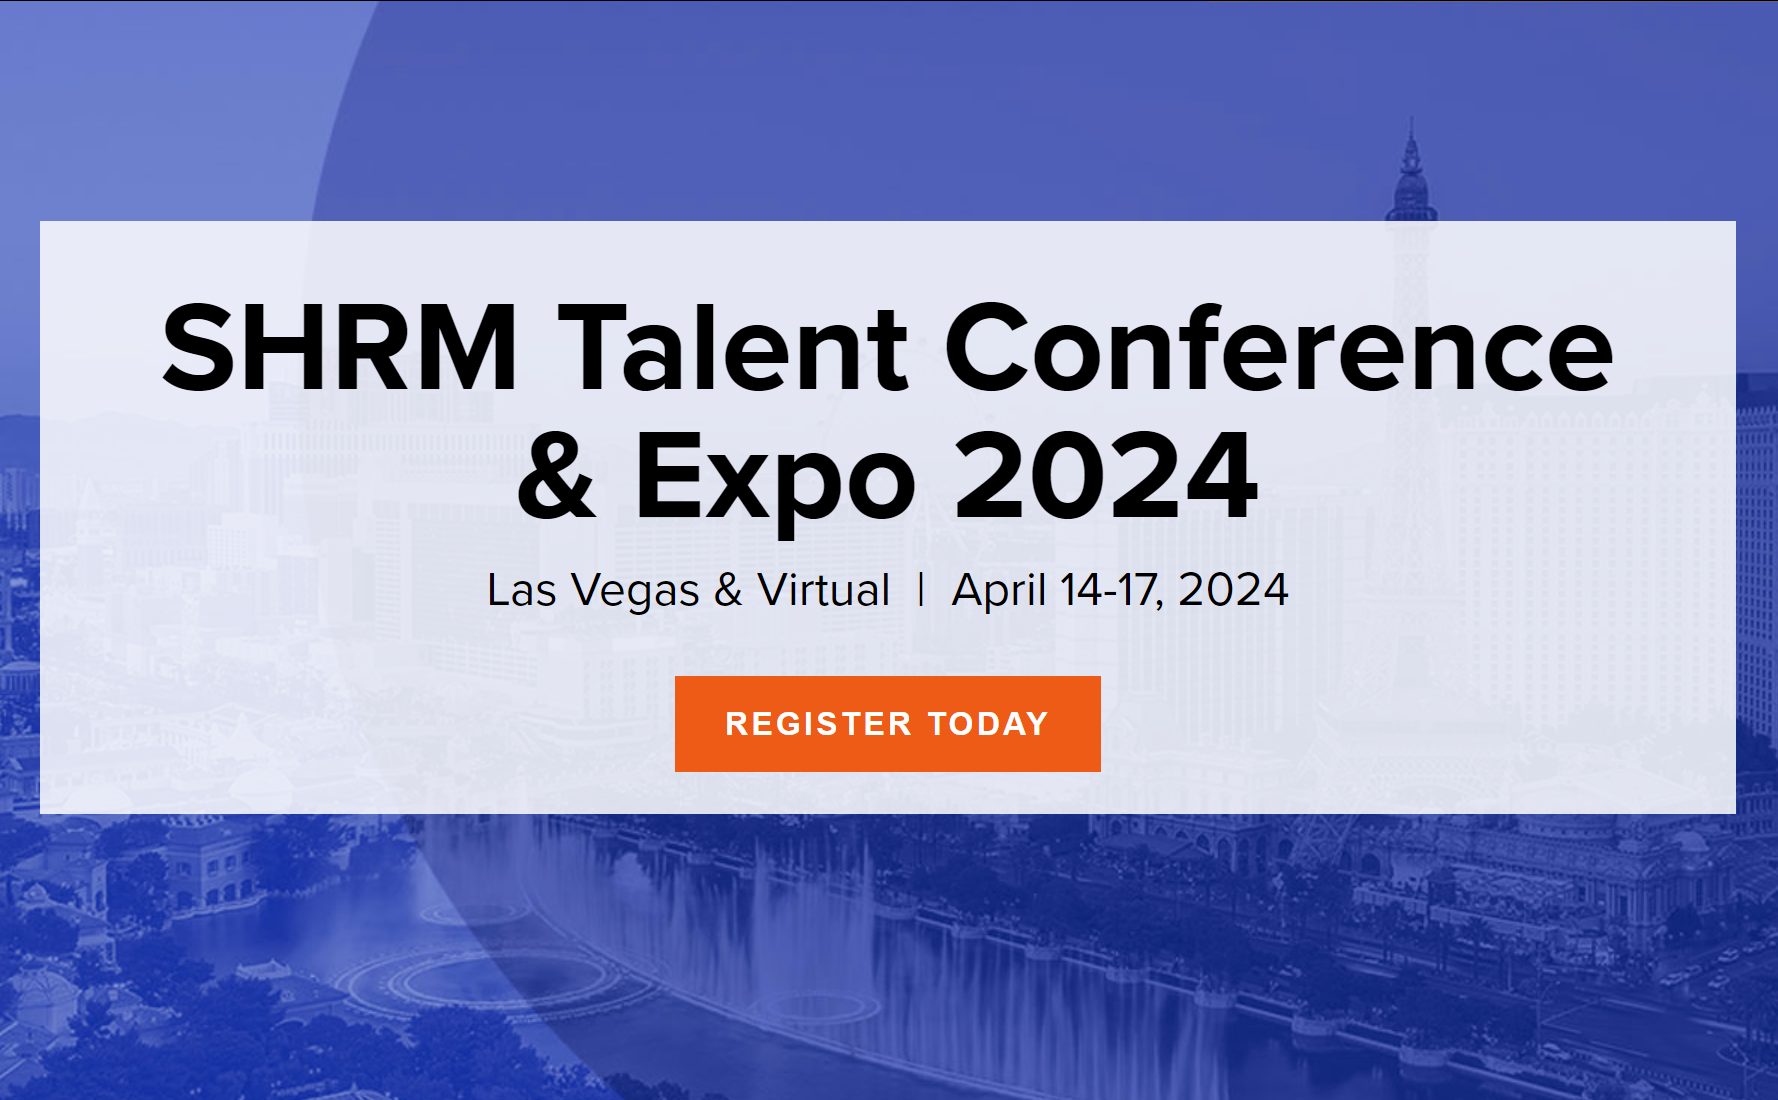 SHRM Talent Conference & Expo 2024